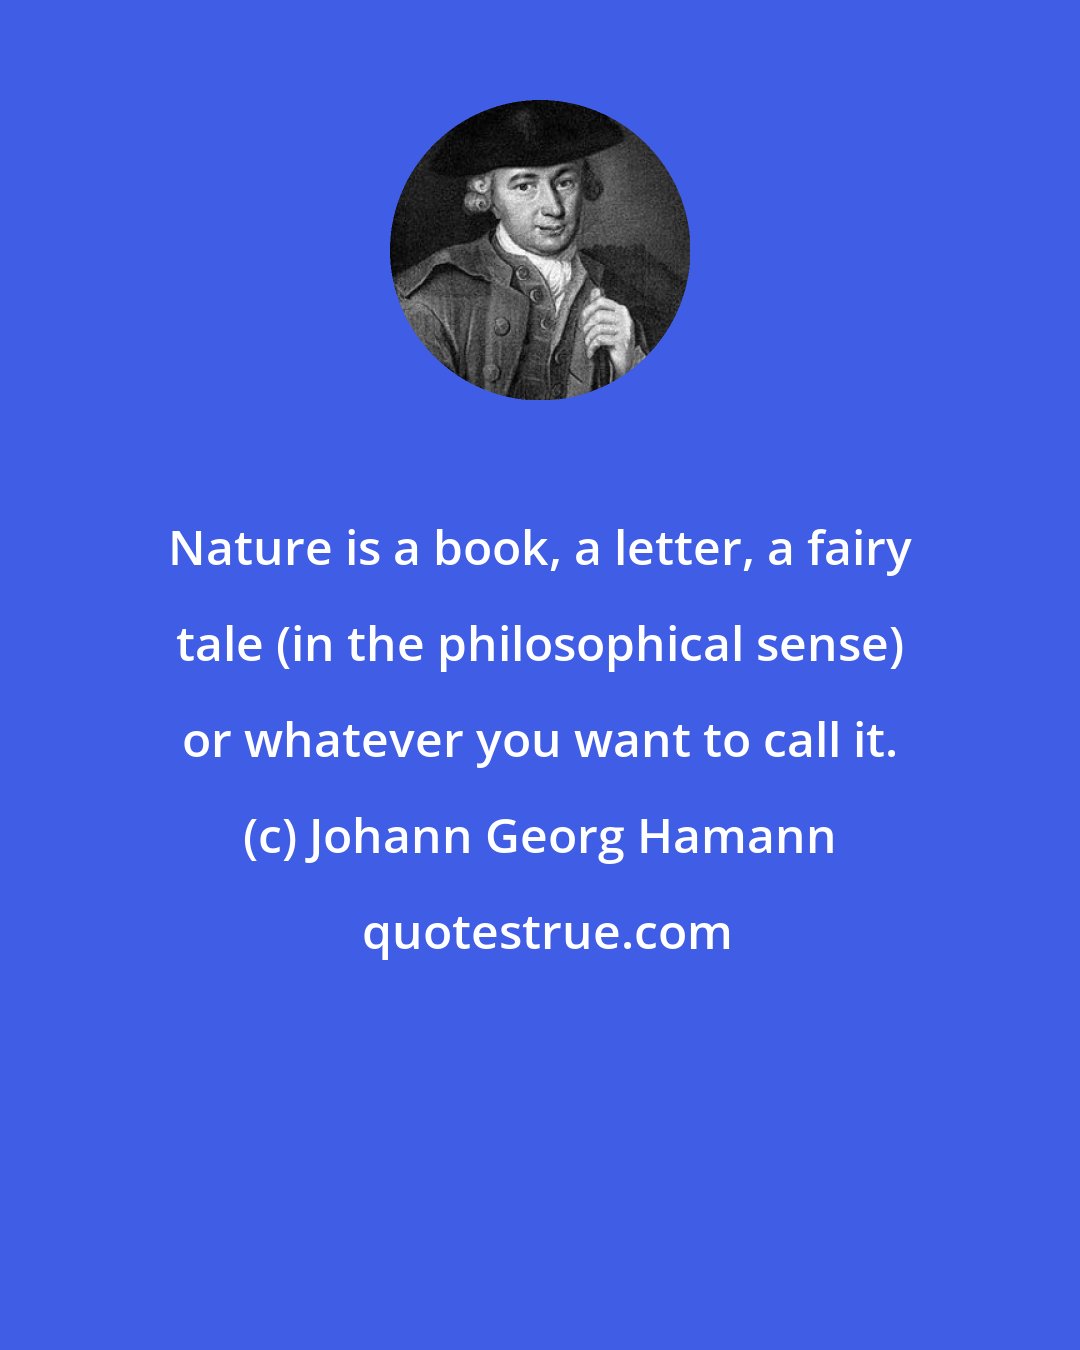 Johann Georg Hamann: Nature is a book, a letter, a fairy tale (in the philosophical sense) or whatever you want to call it.